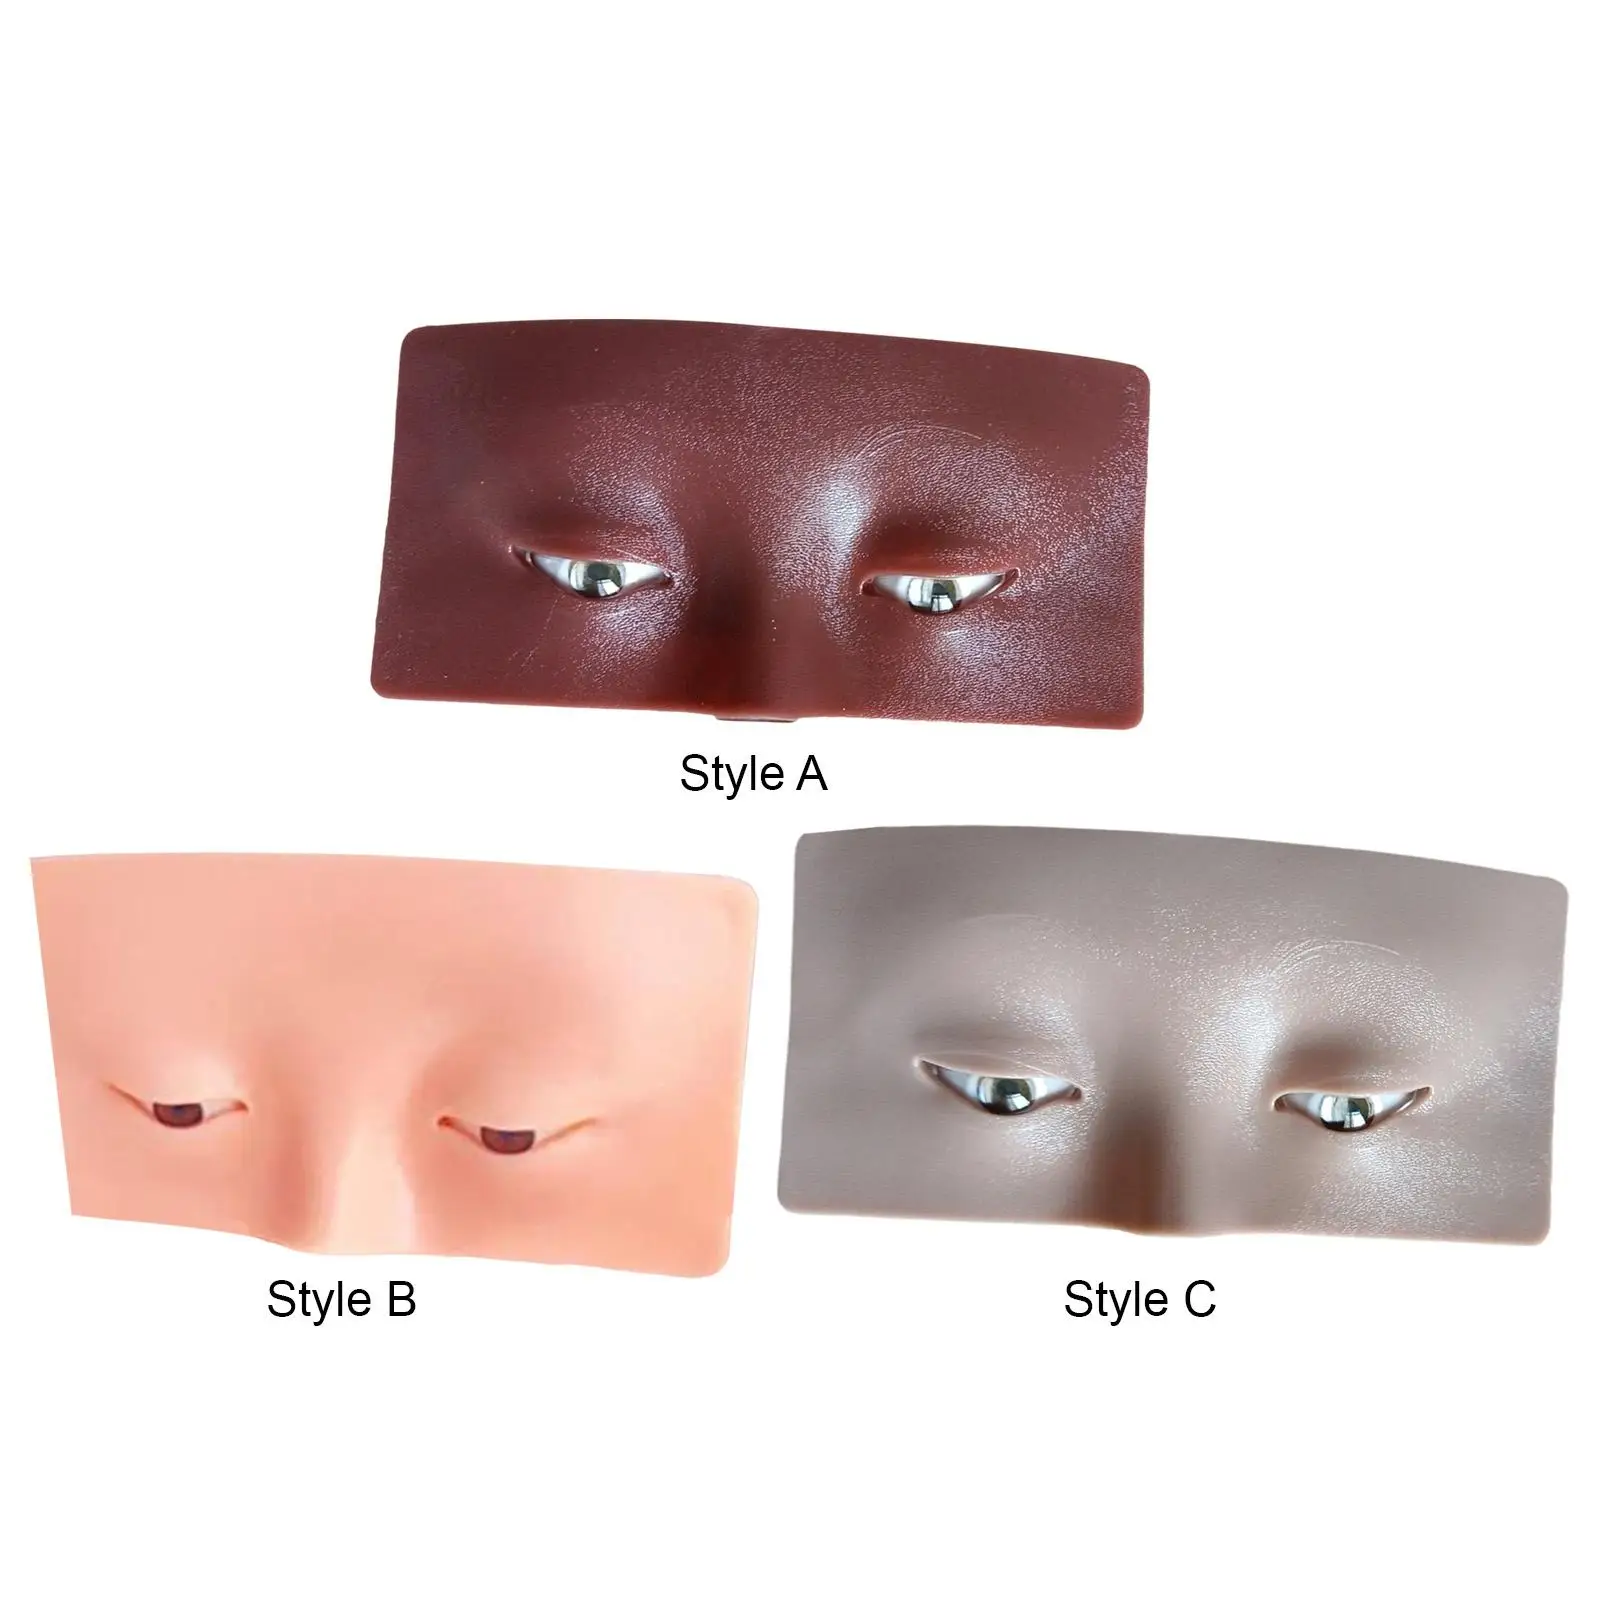 eye Makeup Practice Face Accessory Makeup Mannequin Face Easy to Use The Perfect Aid to Practicing Makeup for Makeup Artists